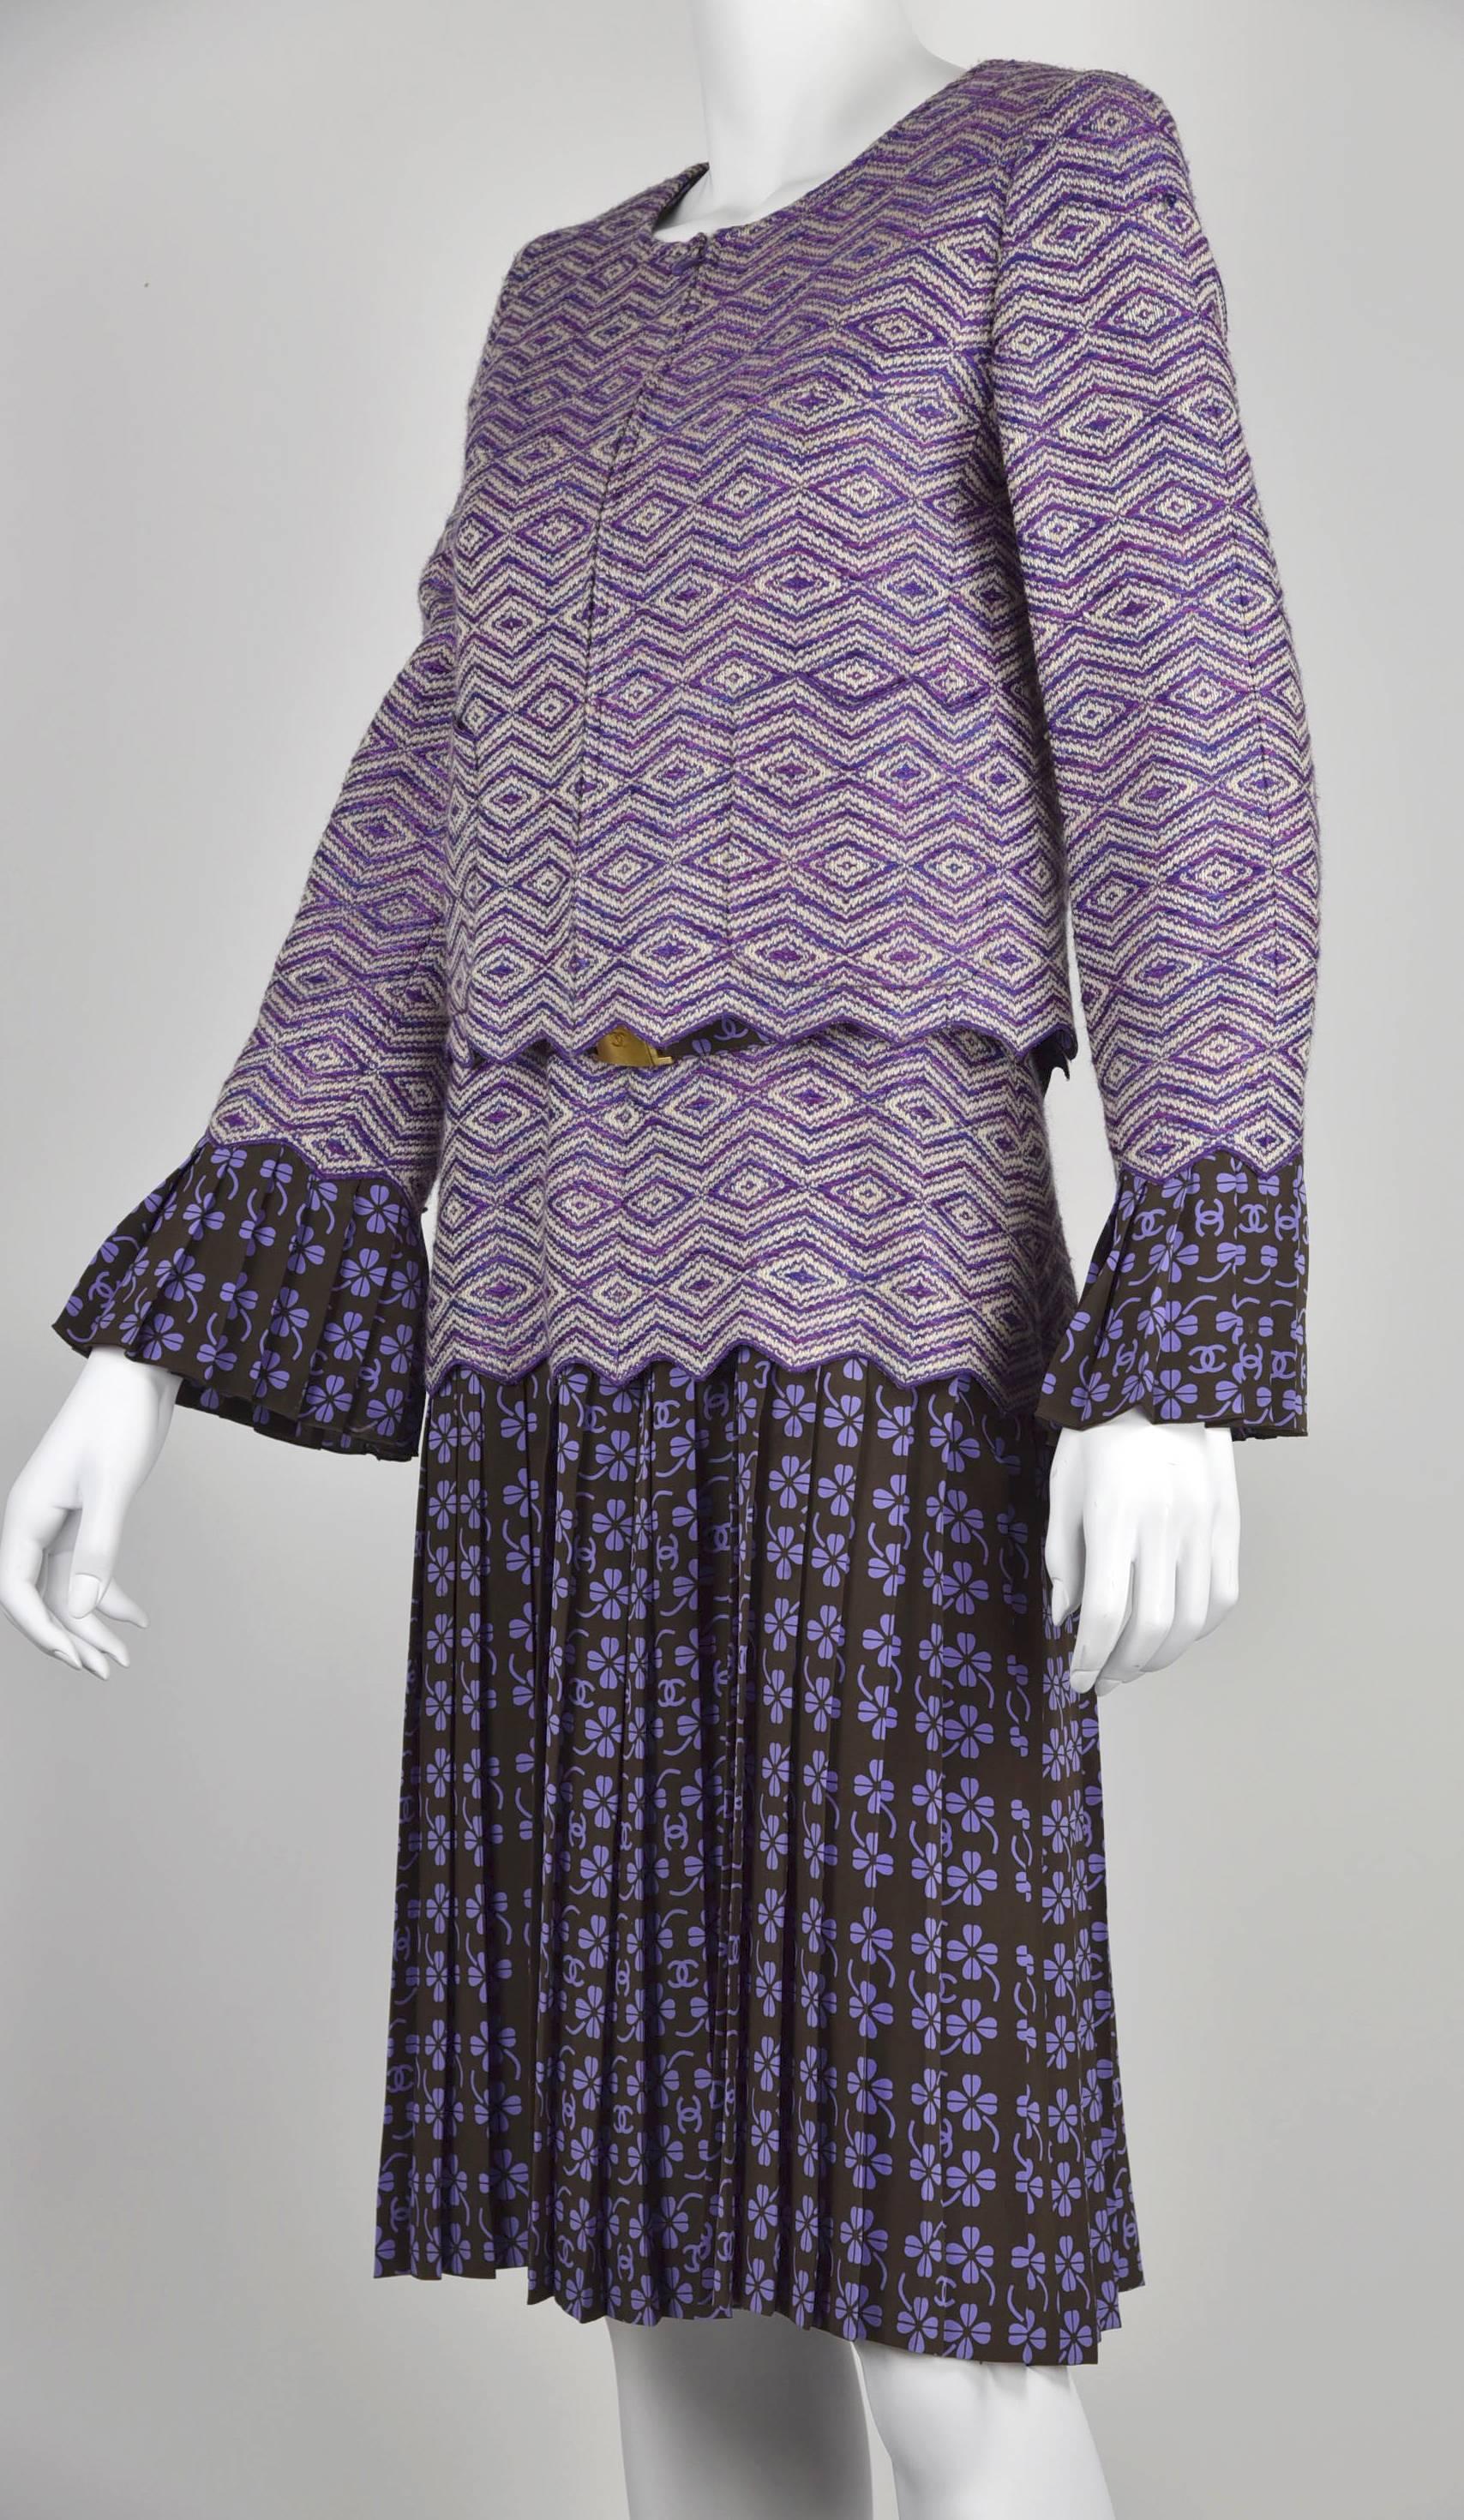 This is an unusual Chanel dress ensemble with a beautiful stand alone pleated skirt dress with belt and a woven pattern wool jacket with matching silk print pleated sleeves. There are not many Chanel ensembles like this with such complex design